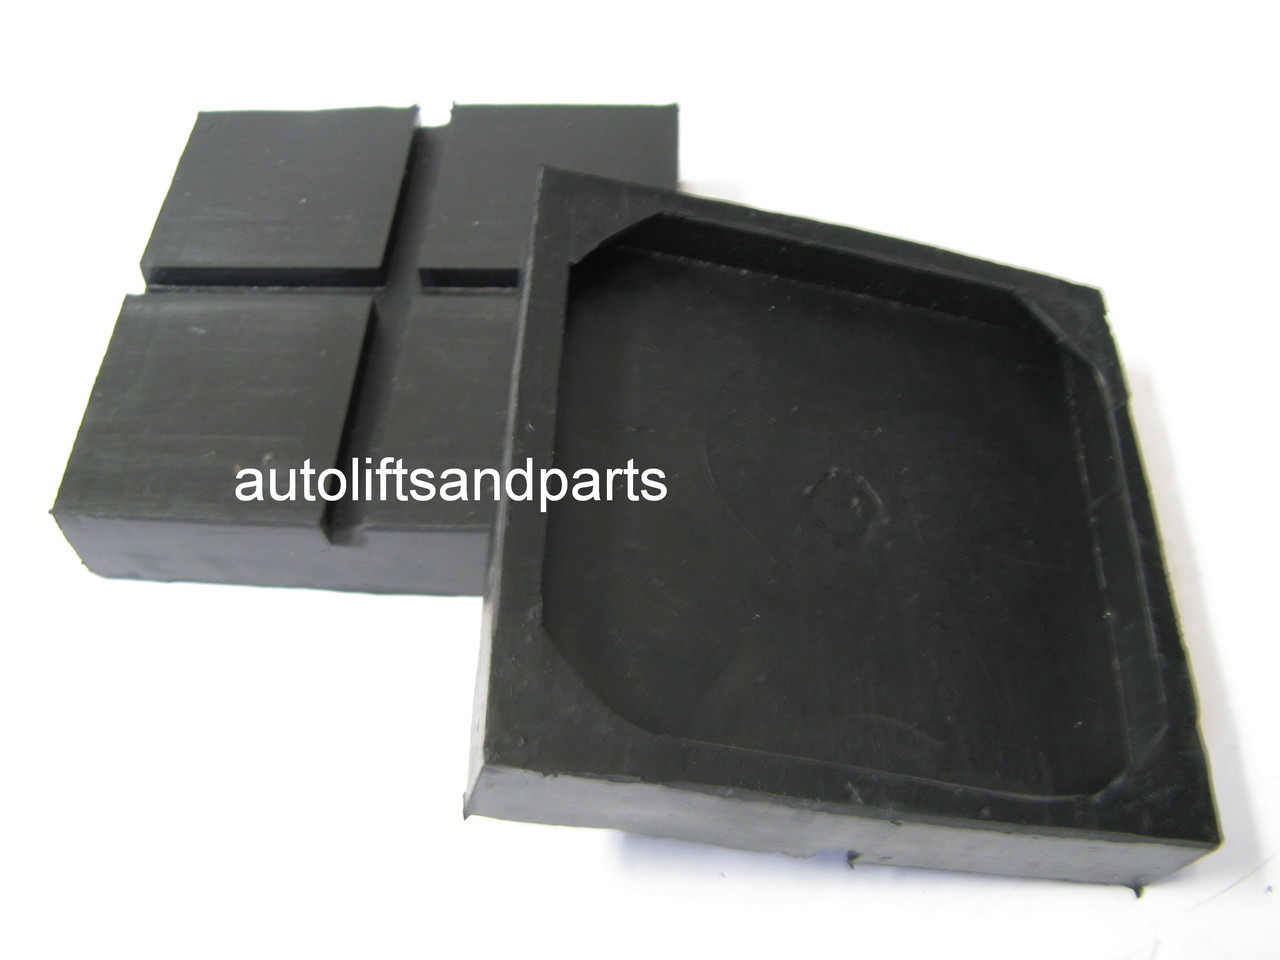 Rubber Lift Arm Pads for Globe / Ford Smith Lift Set 4